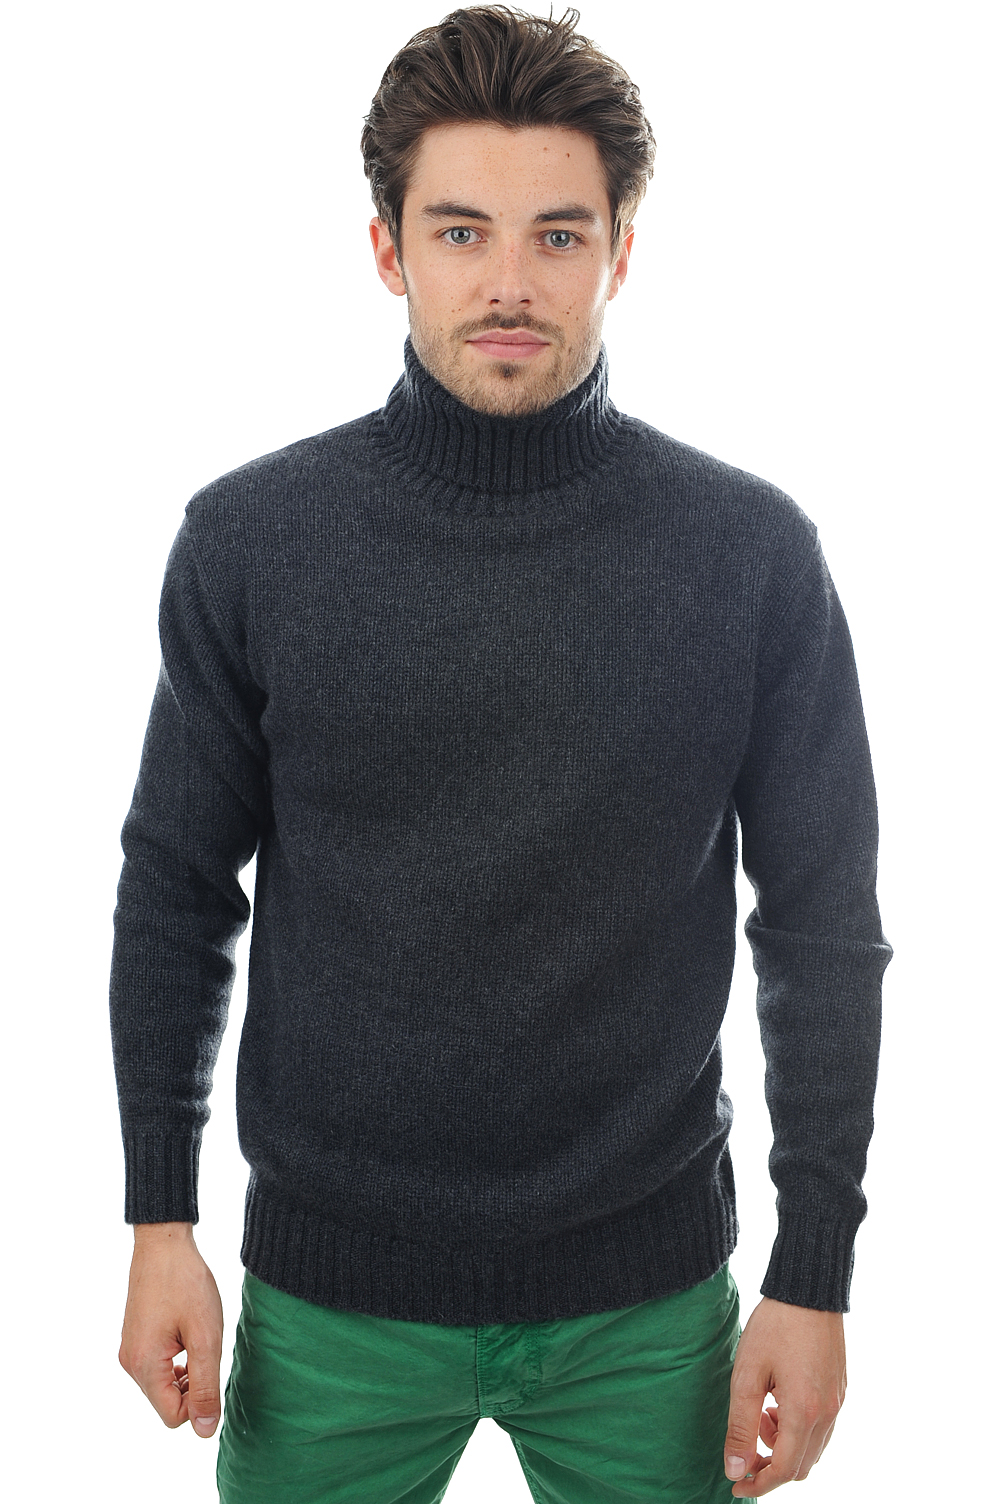 Cashmere men chunky sweater achille charcoal marl 4xl